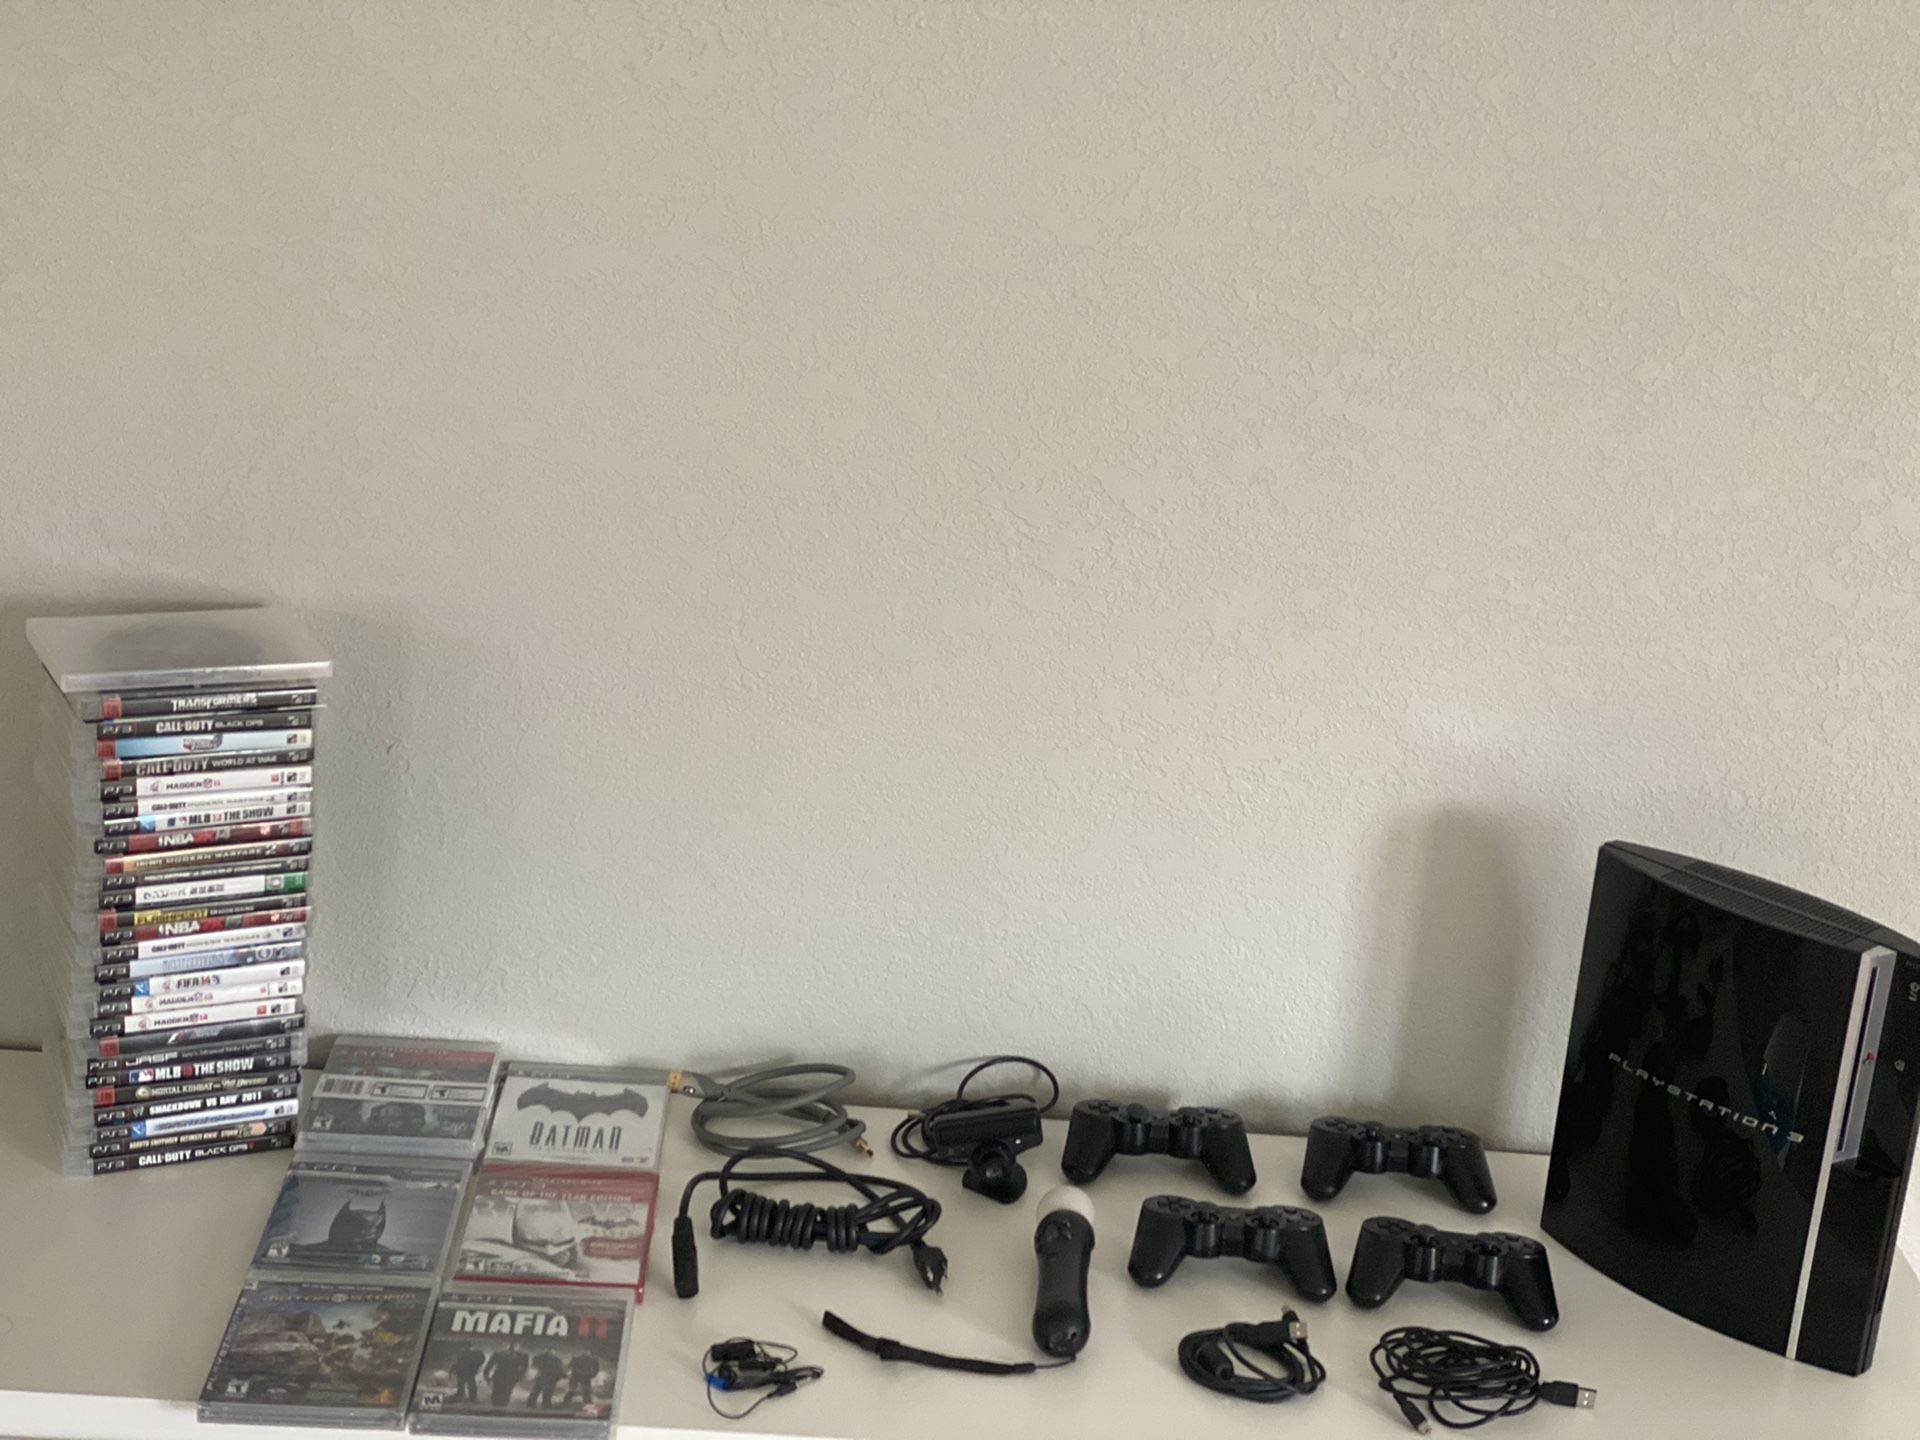 PlayStation 3 with games controllers and more